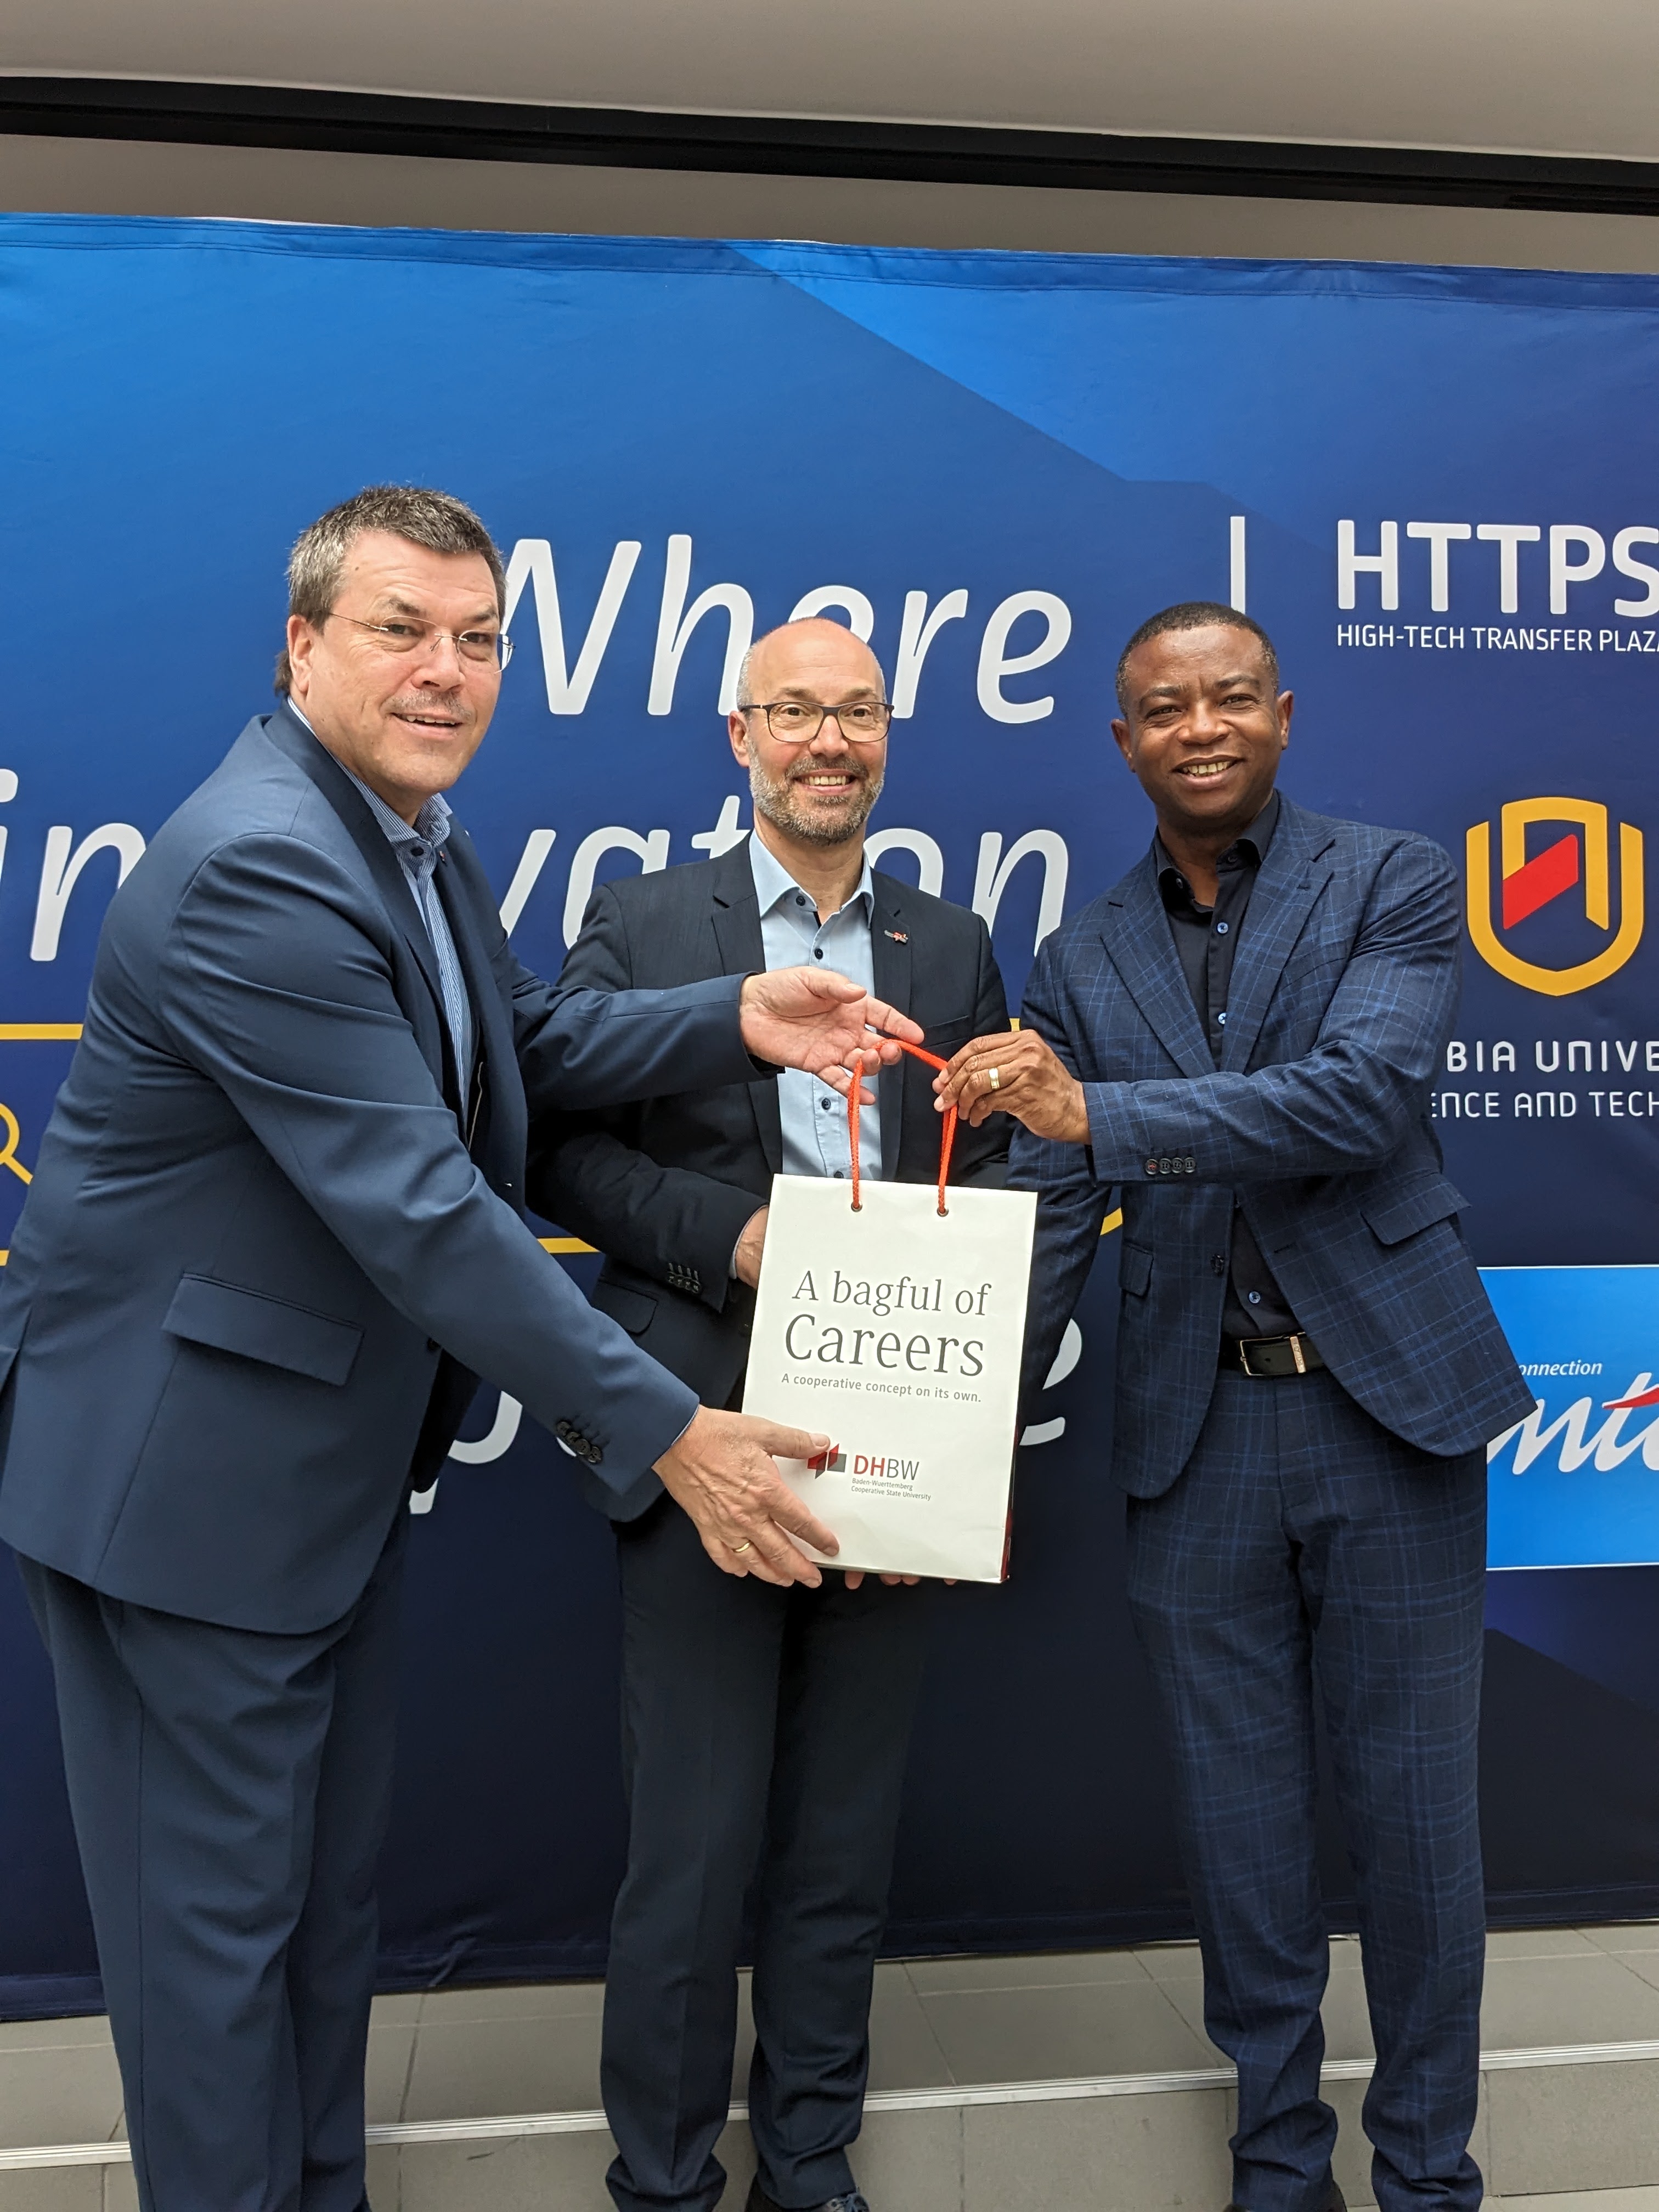 NUST Vice- Chancellor Dr Erold Naomab receiving a gift from Prof. Dr.-Ing. Herbert Dreher, President DHBW from  Ravensburg Campus (left)  and  Prof. Dr.-Ing. Stephan Schenkel, President DHBW from  Karlsruhe (right). 